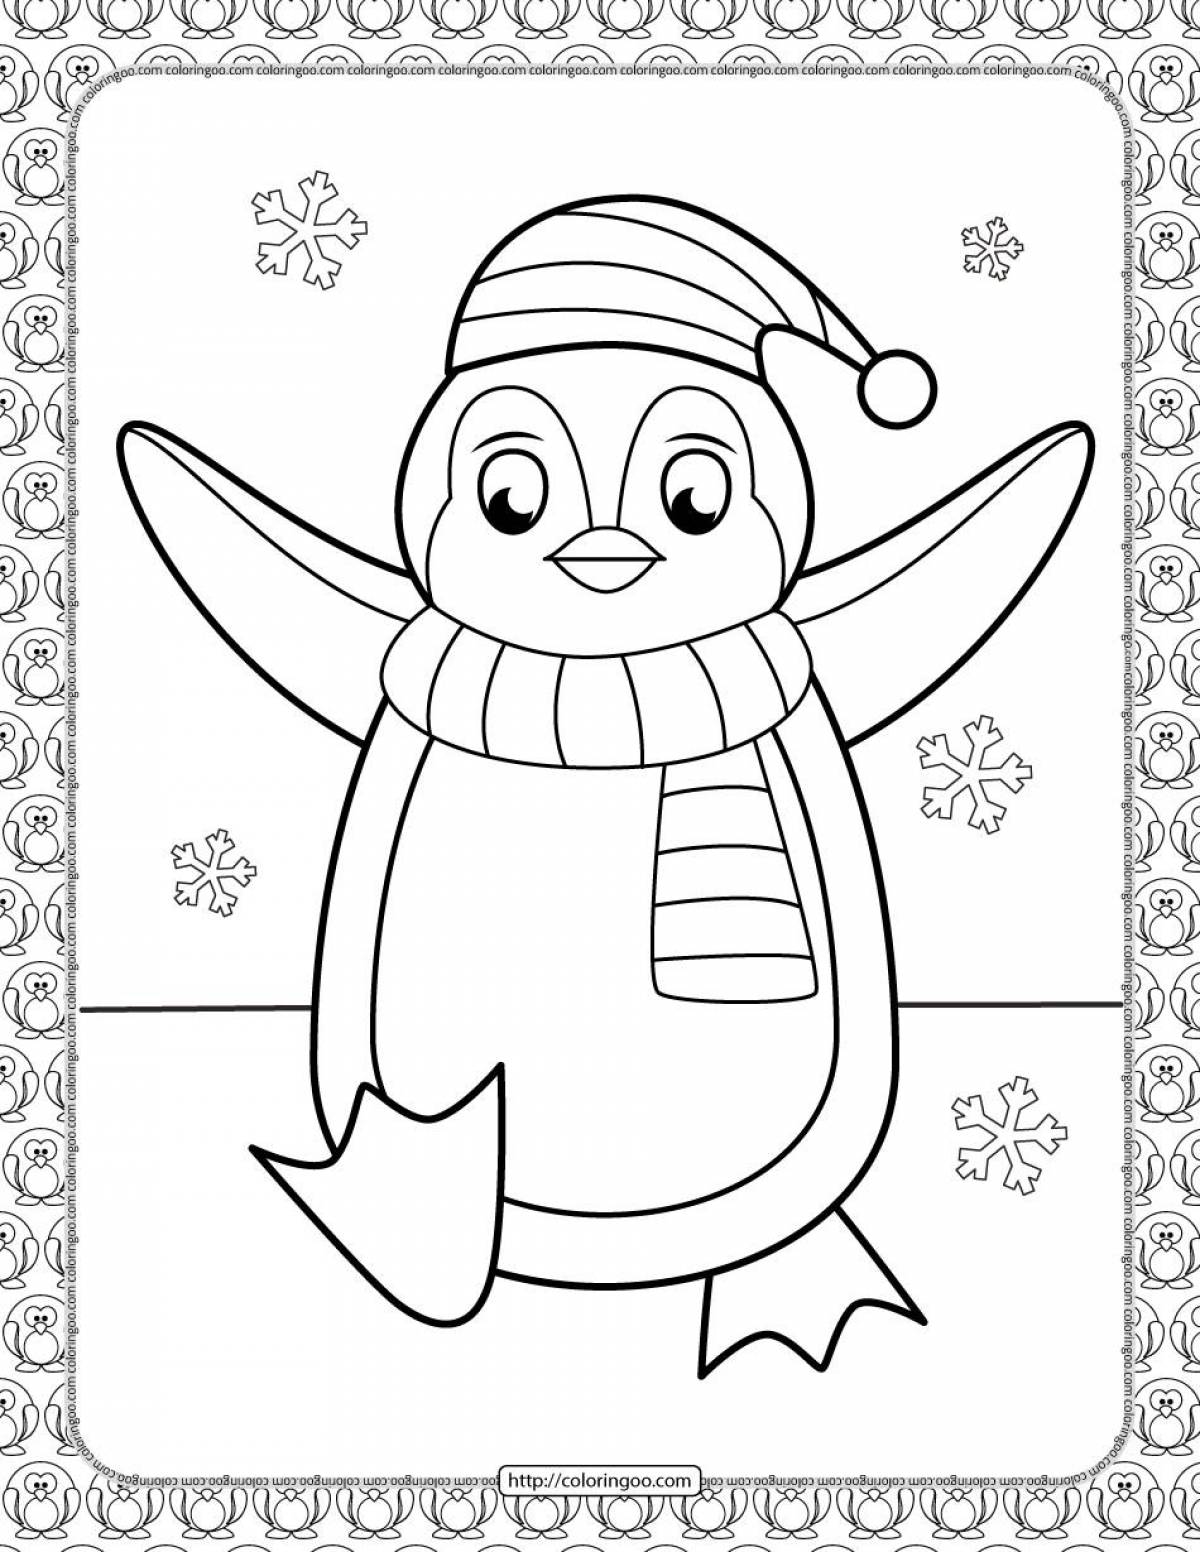 Crazy penguin coloring book for kids